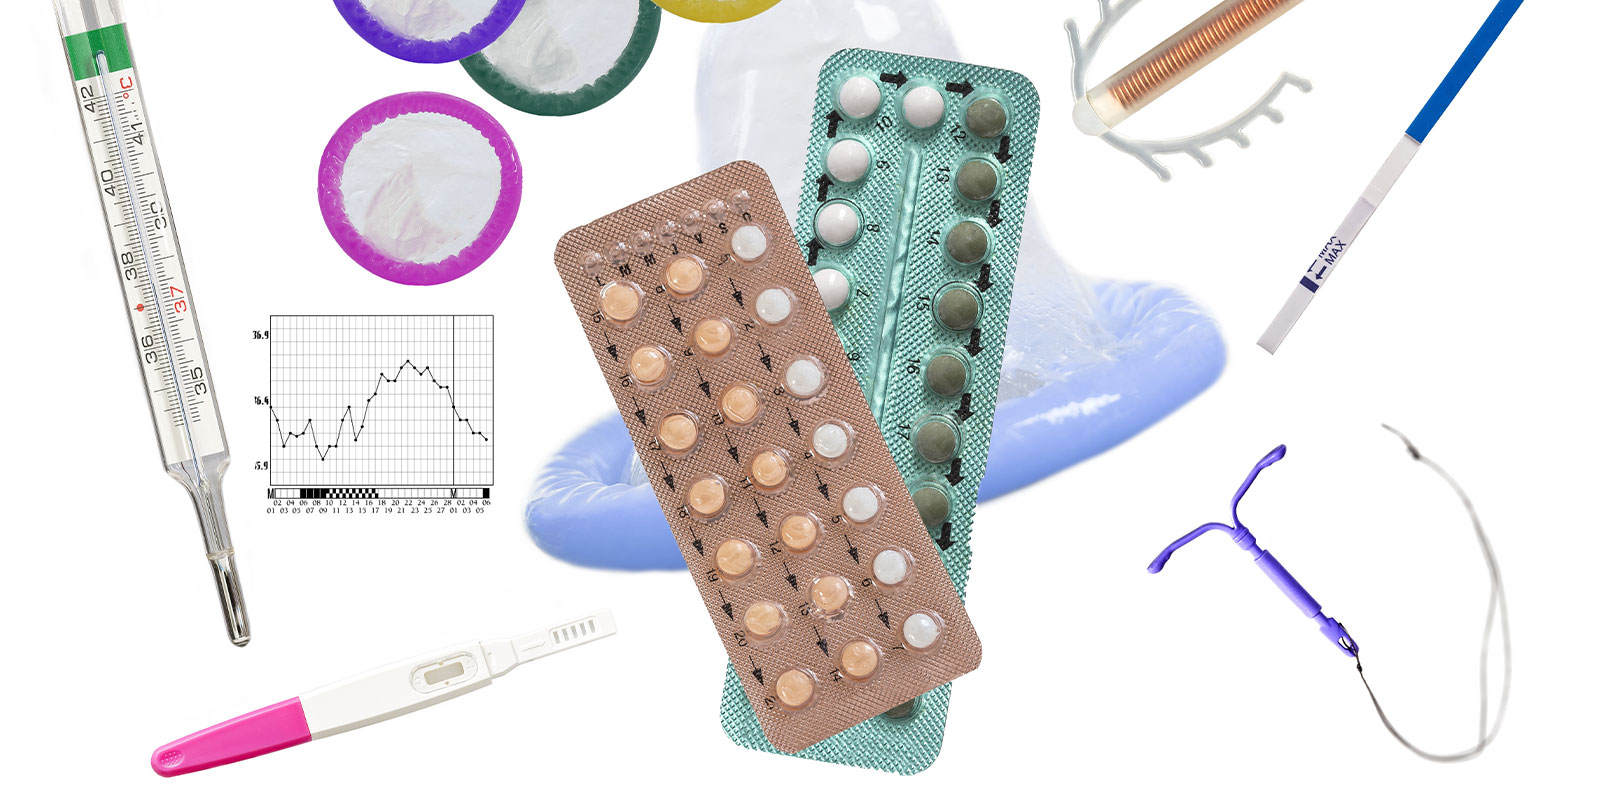 different kinds of Hormonal Contraception on white background